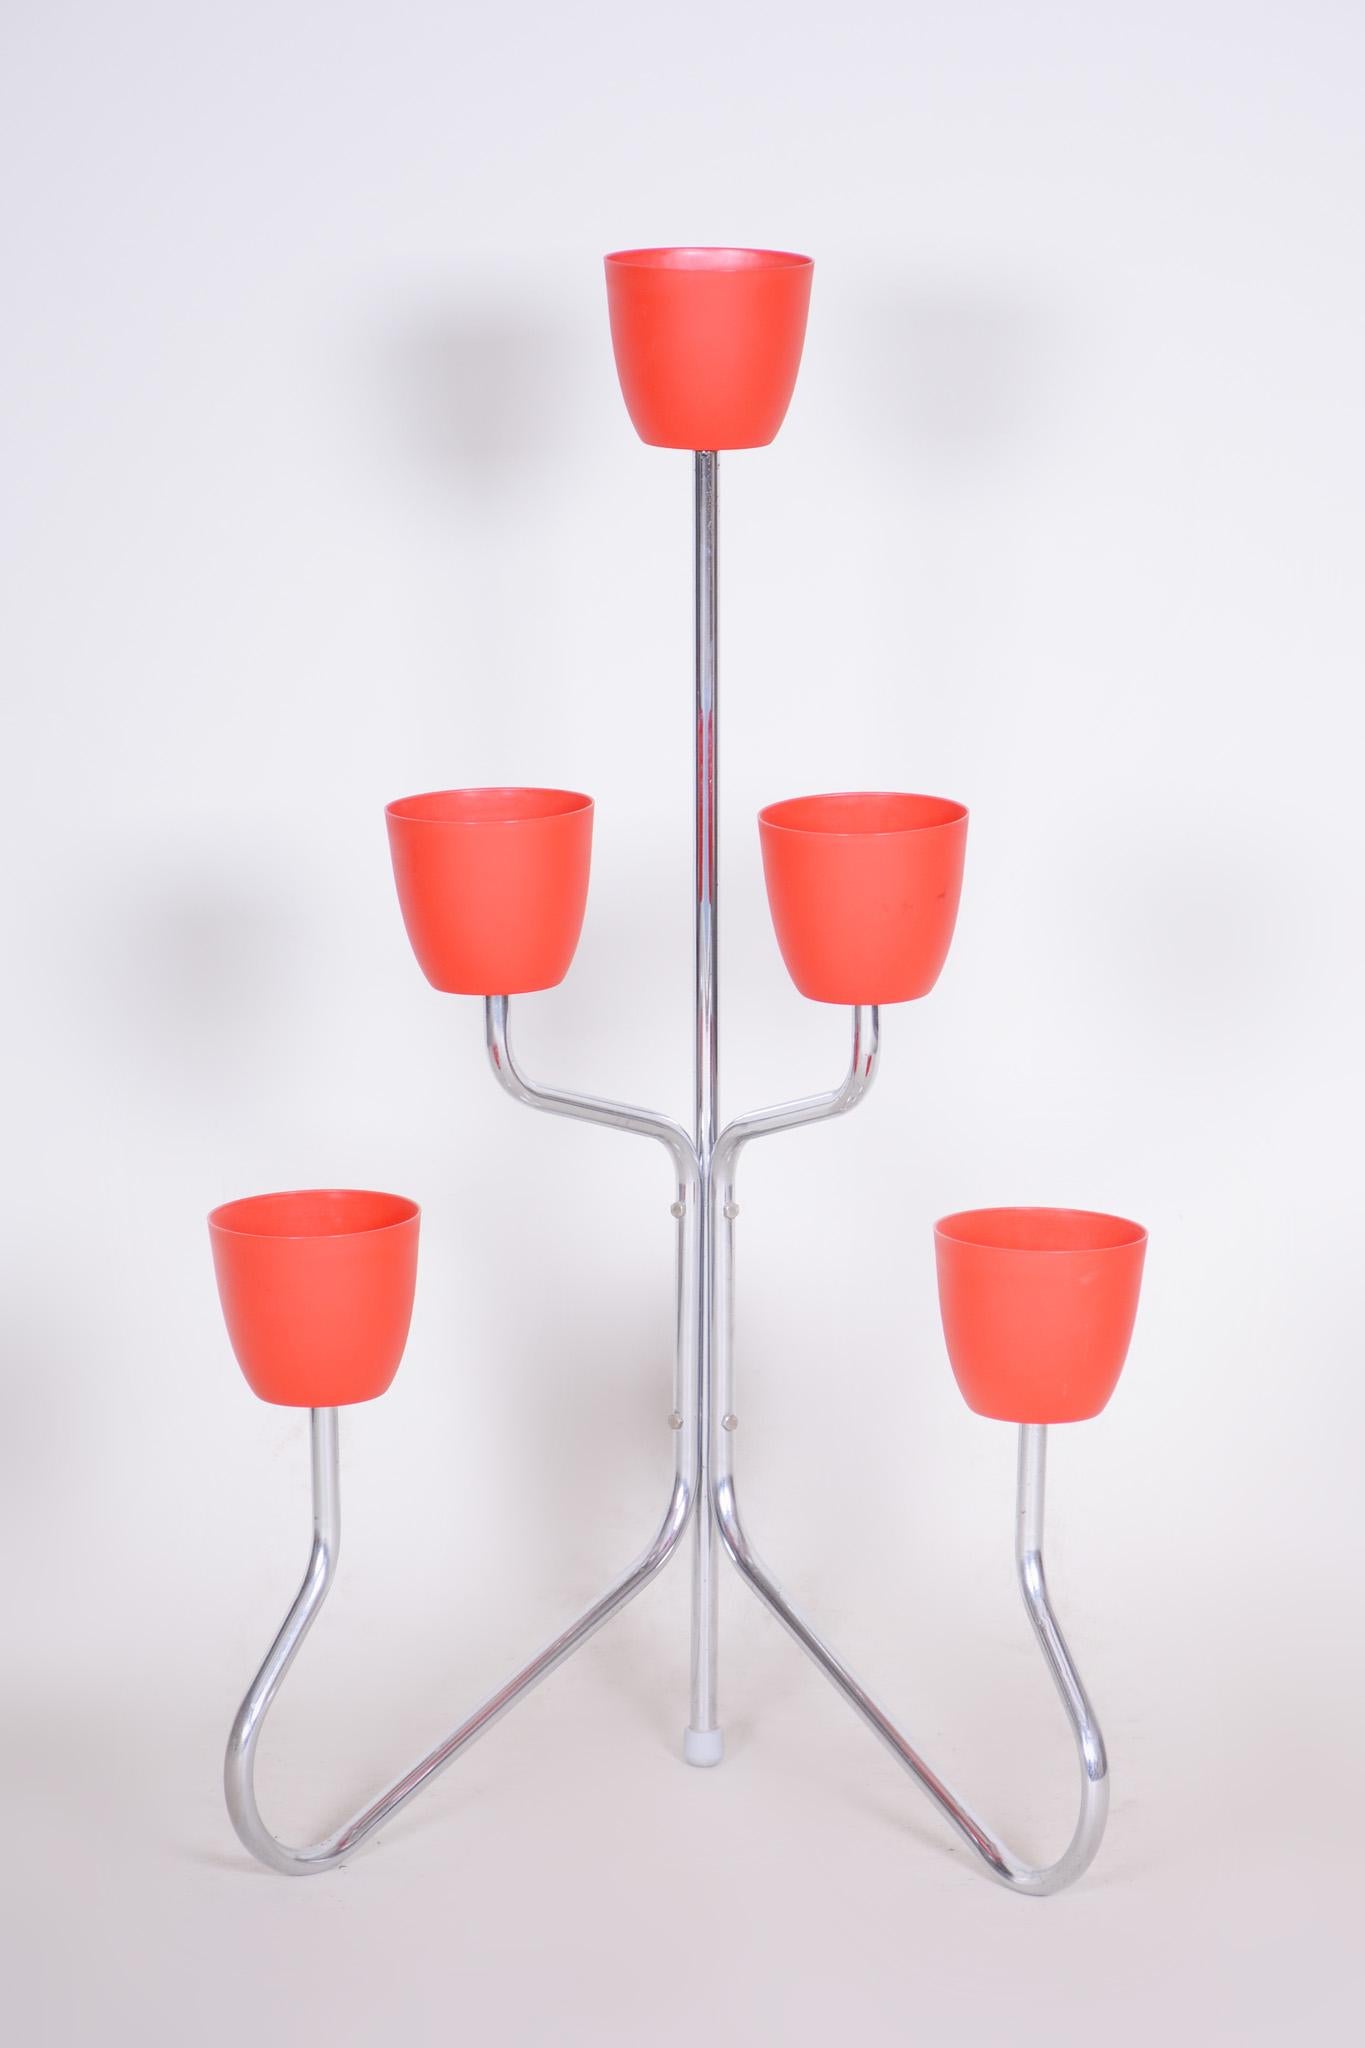 This flower stand with a frame of bent steel tube and plastic flower pots, was made in the 1950s in the Czech Republic. Original chromium plating in perfect original condition.

Source: Czechia
Period: 1950-1959.